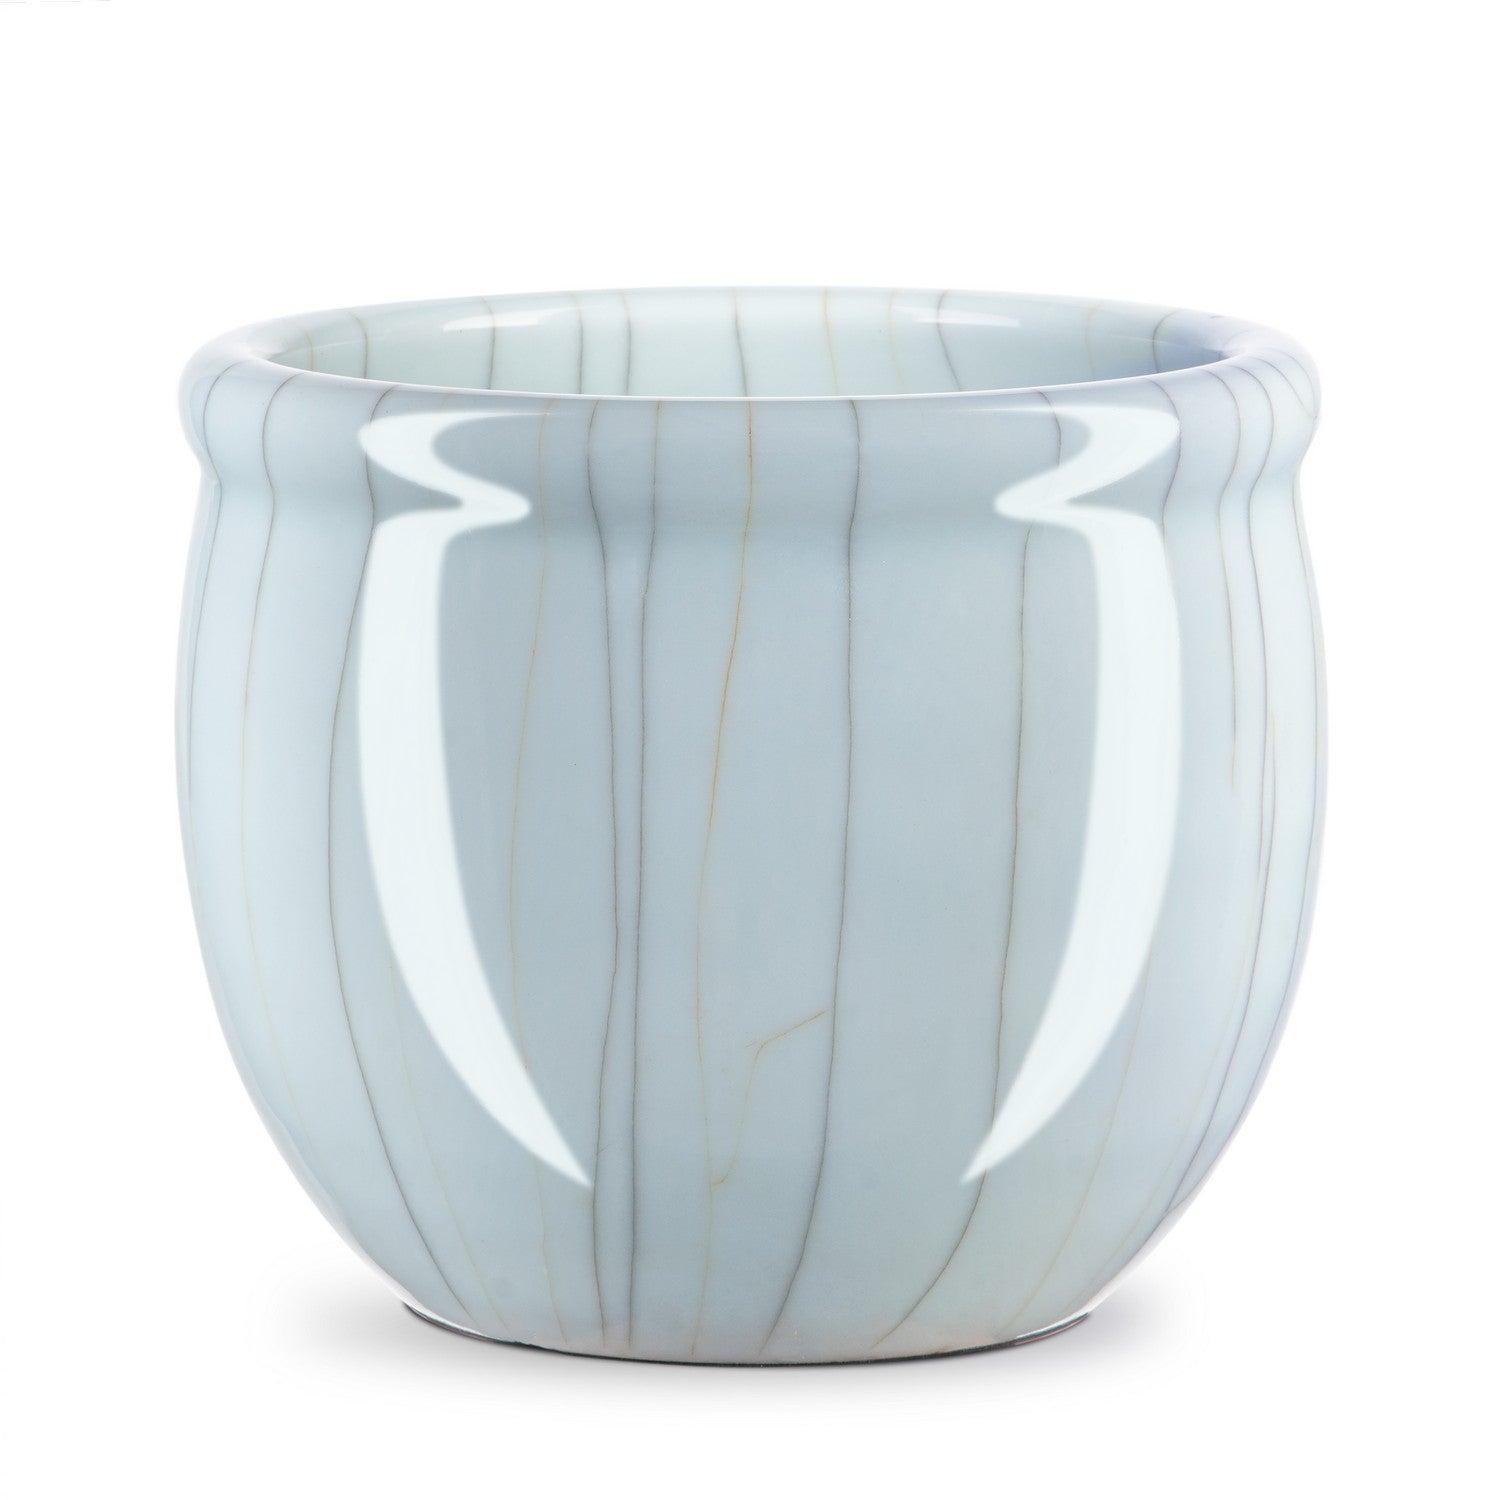 Currey and Company - 1200-0693 - Planter - Celadon Crackle